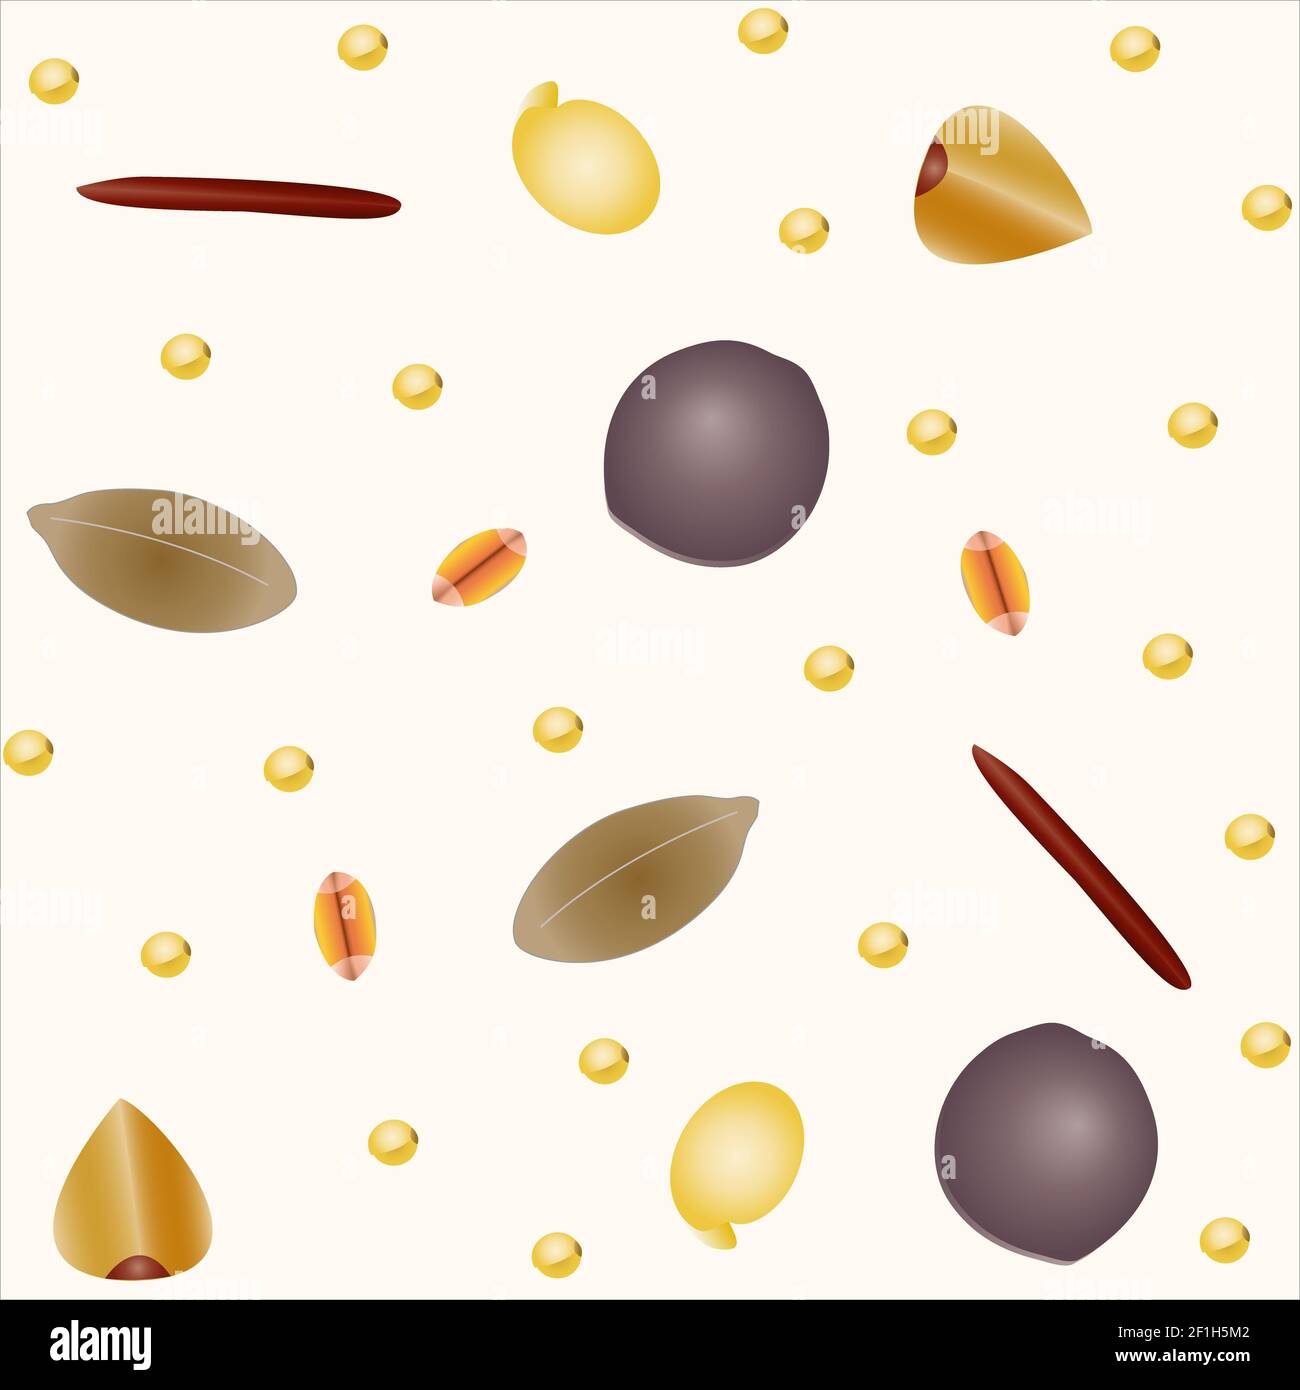 Cereals grains seamless pattern Stock Photo